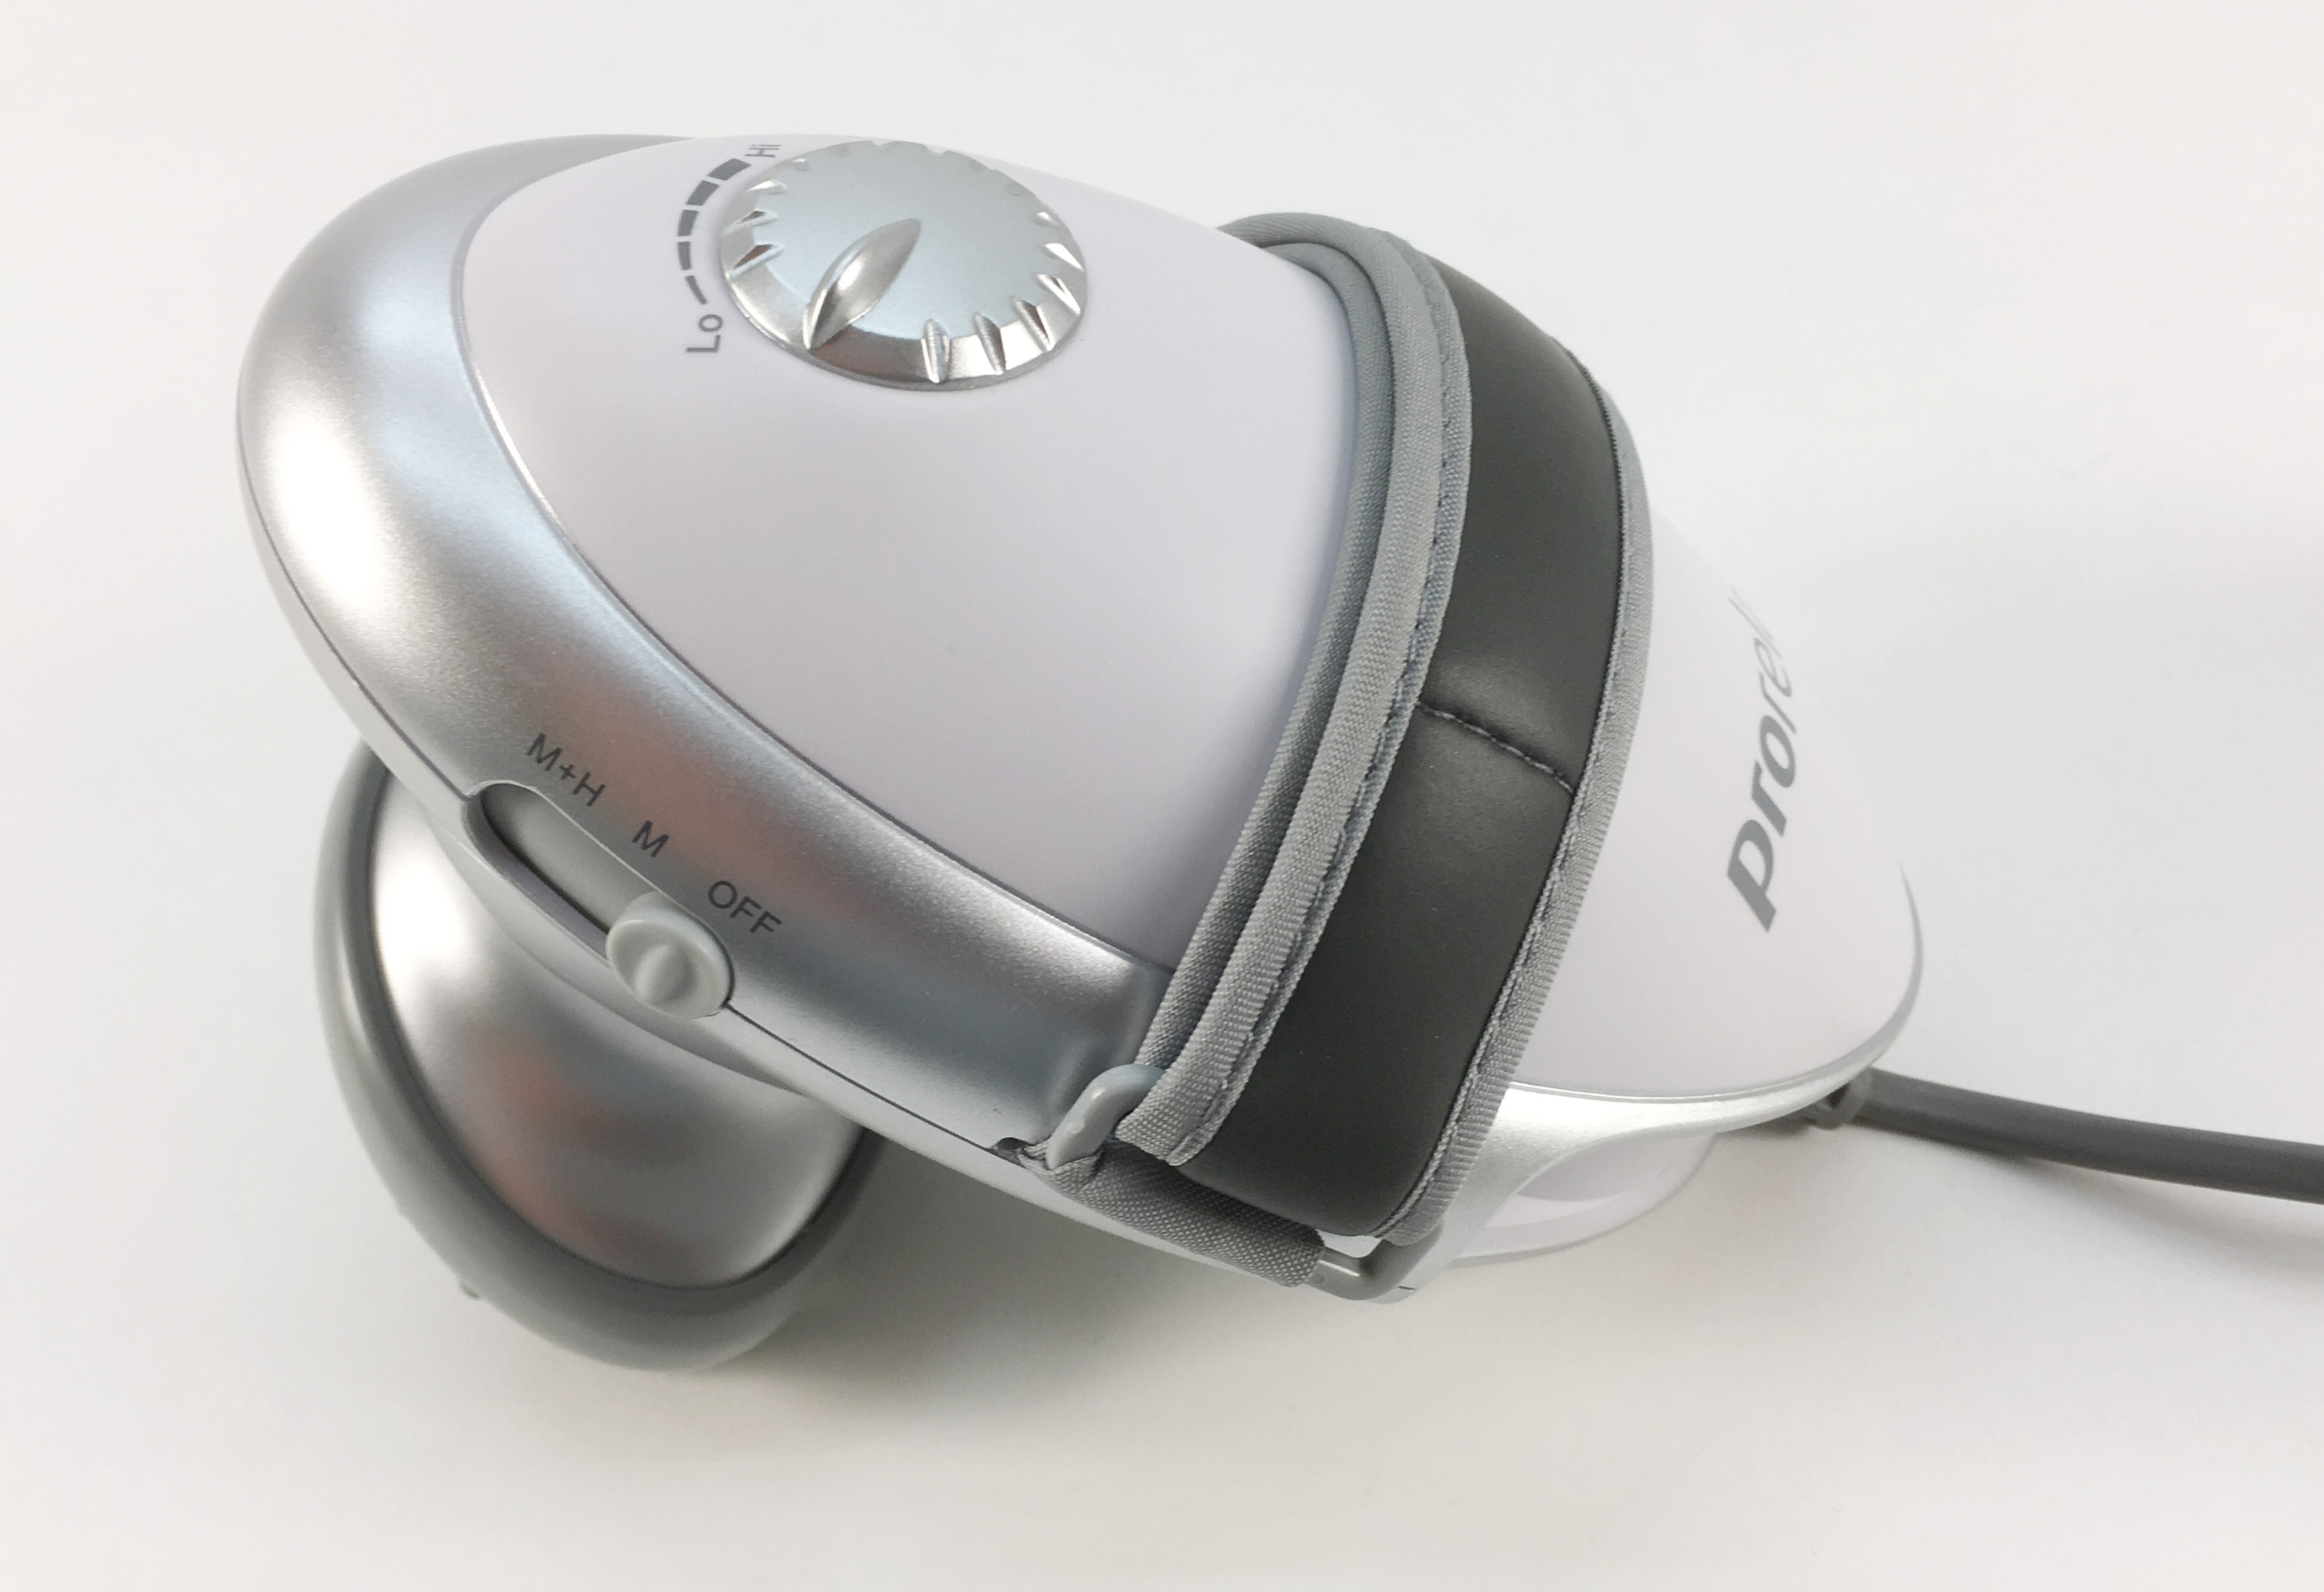 Easy to use Prorelax intensive massager